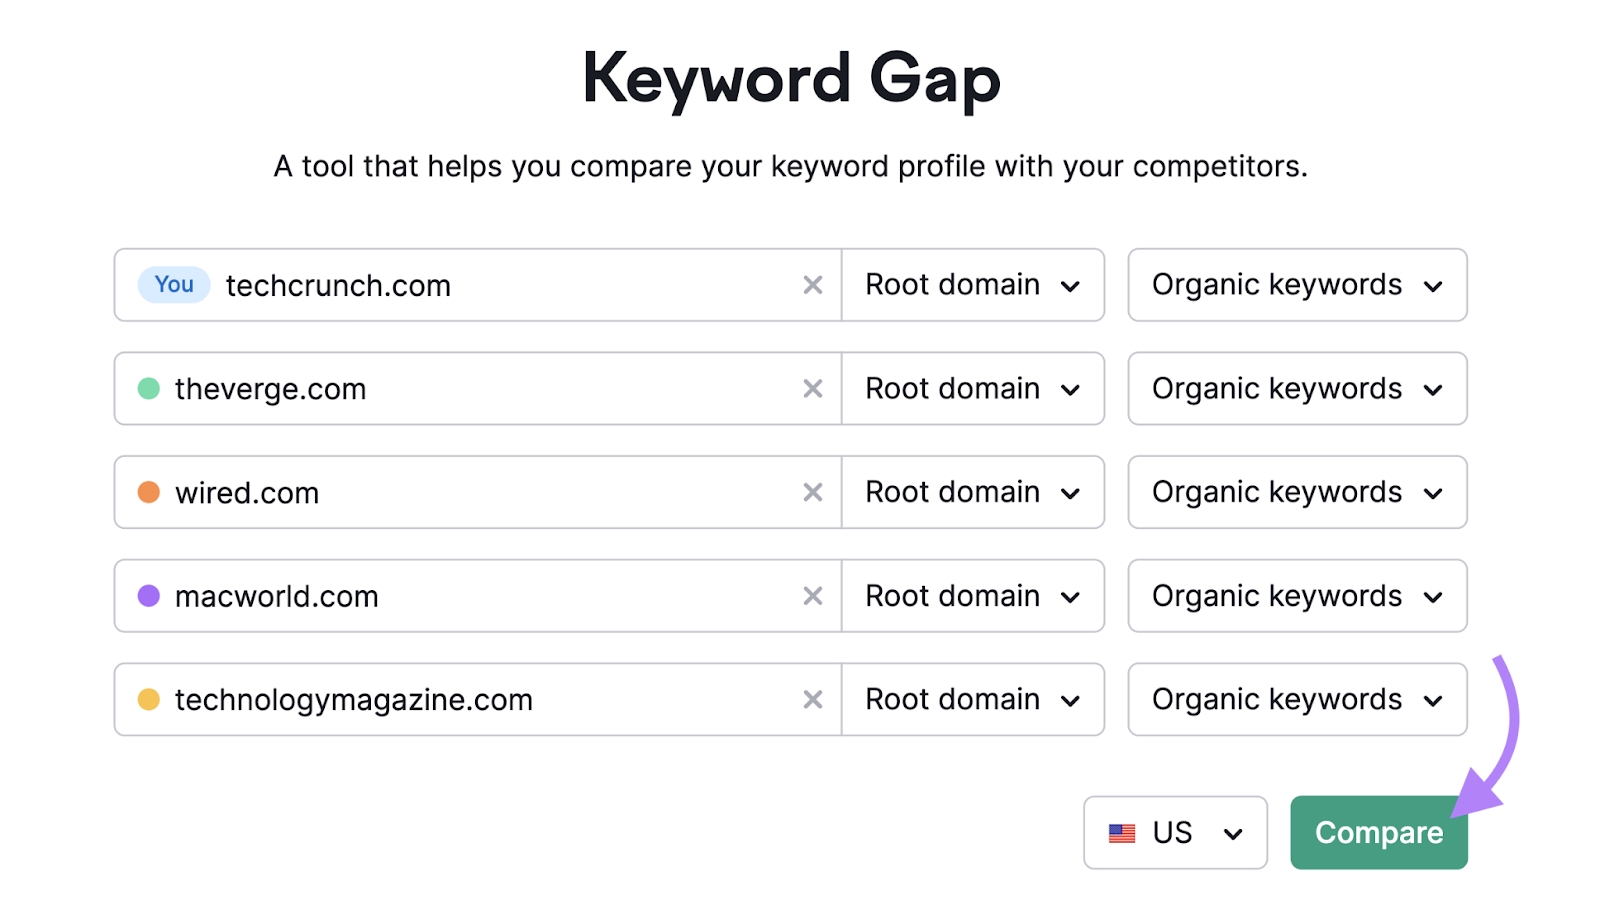 domains like techcrunch, the verge, and wired entered into keyword gap tool